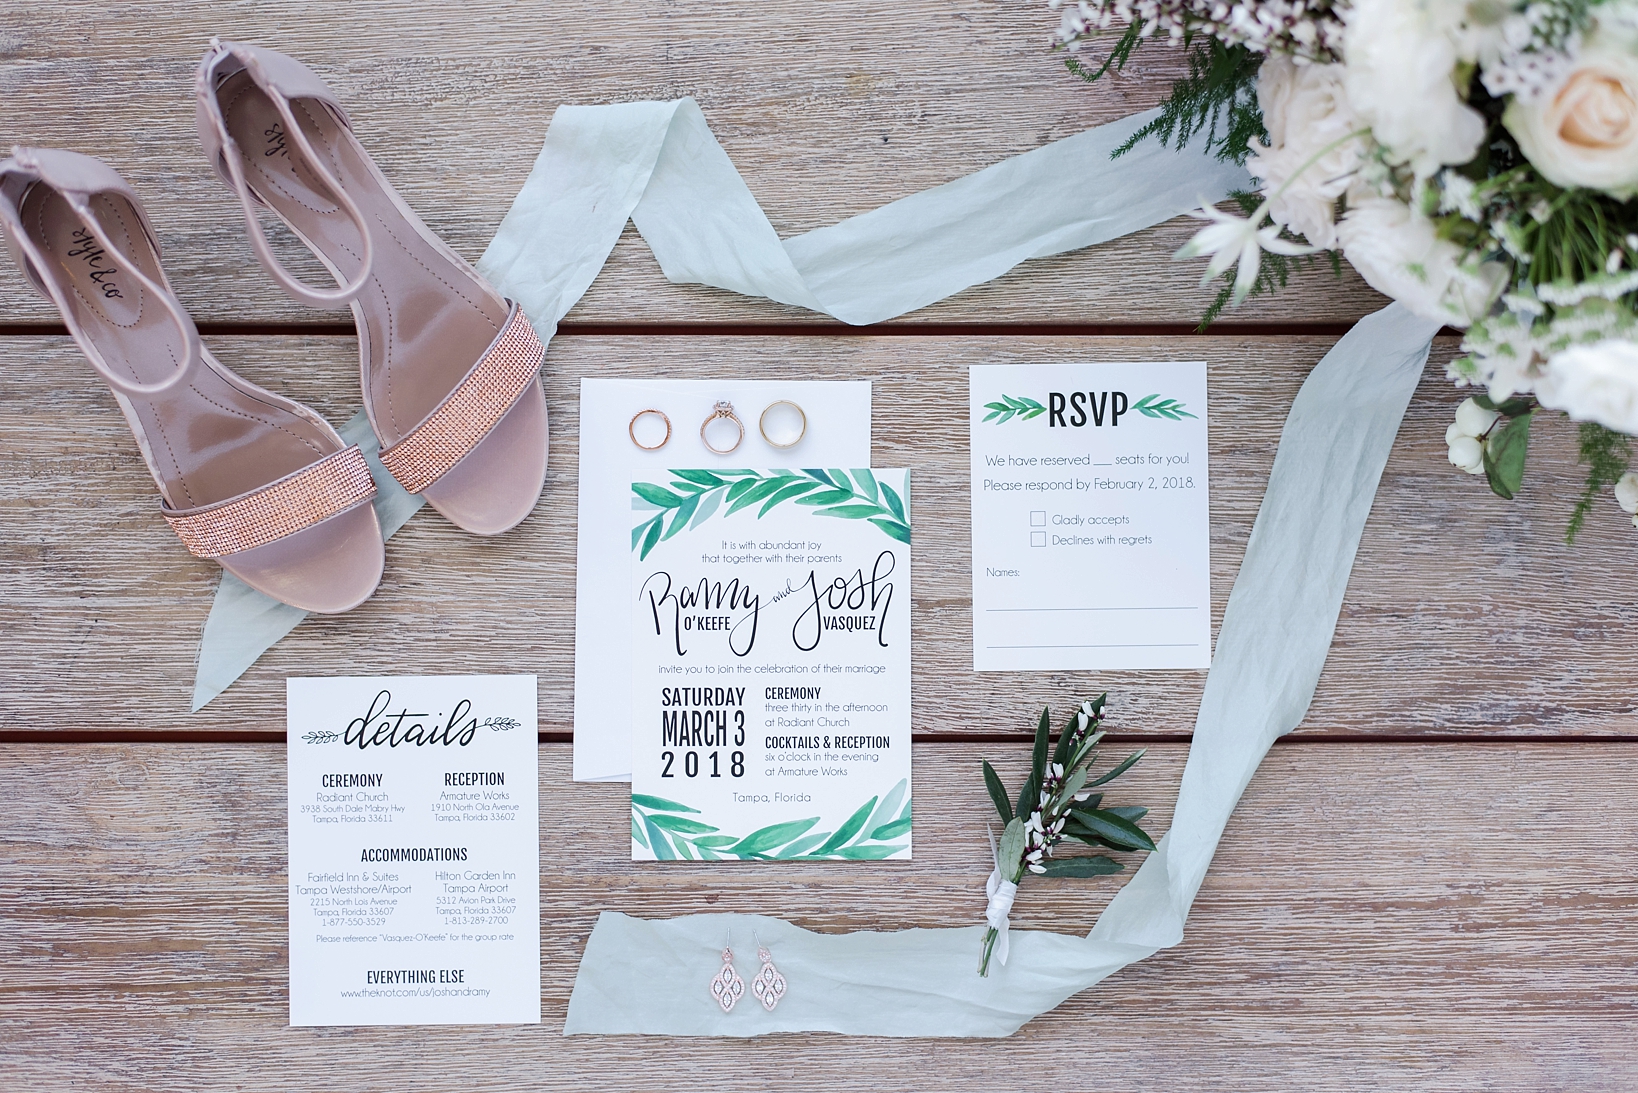 Wedding invitation suite with fern accents and rustic wood background